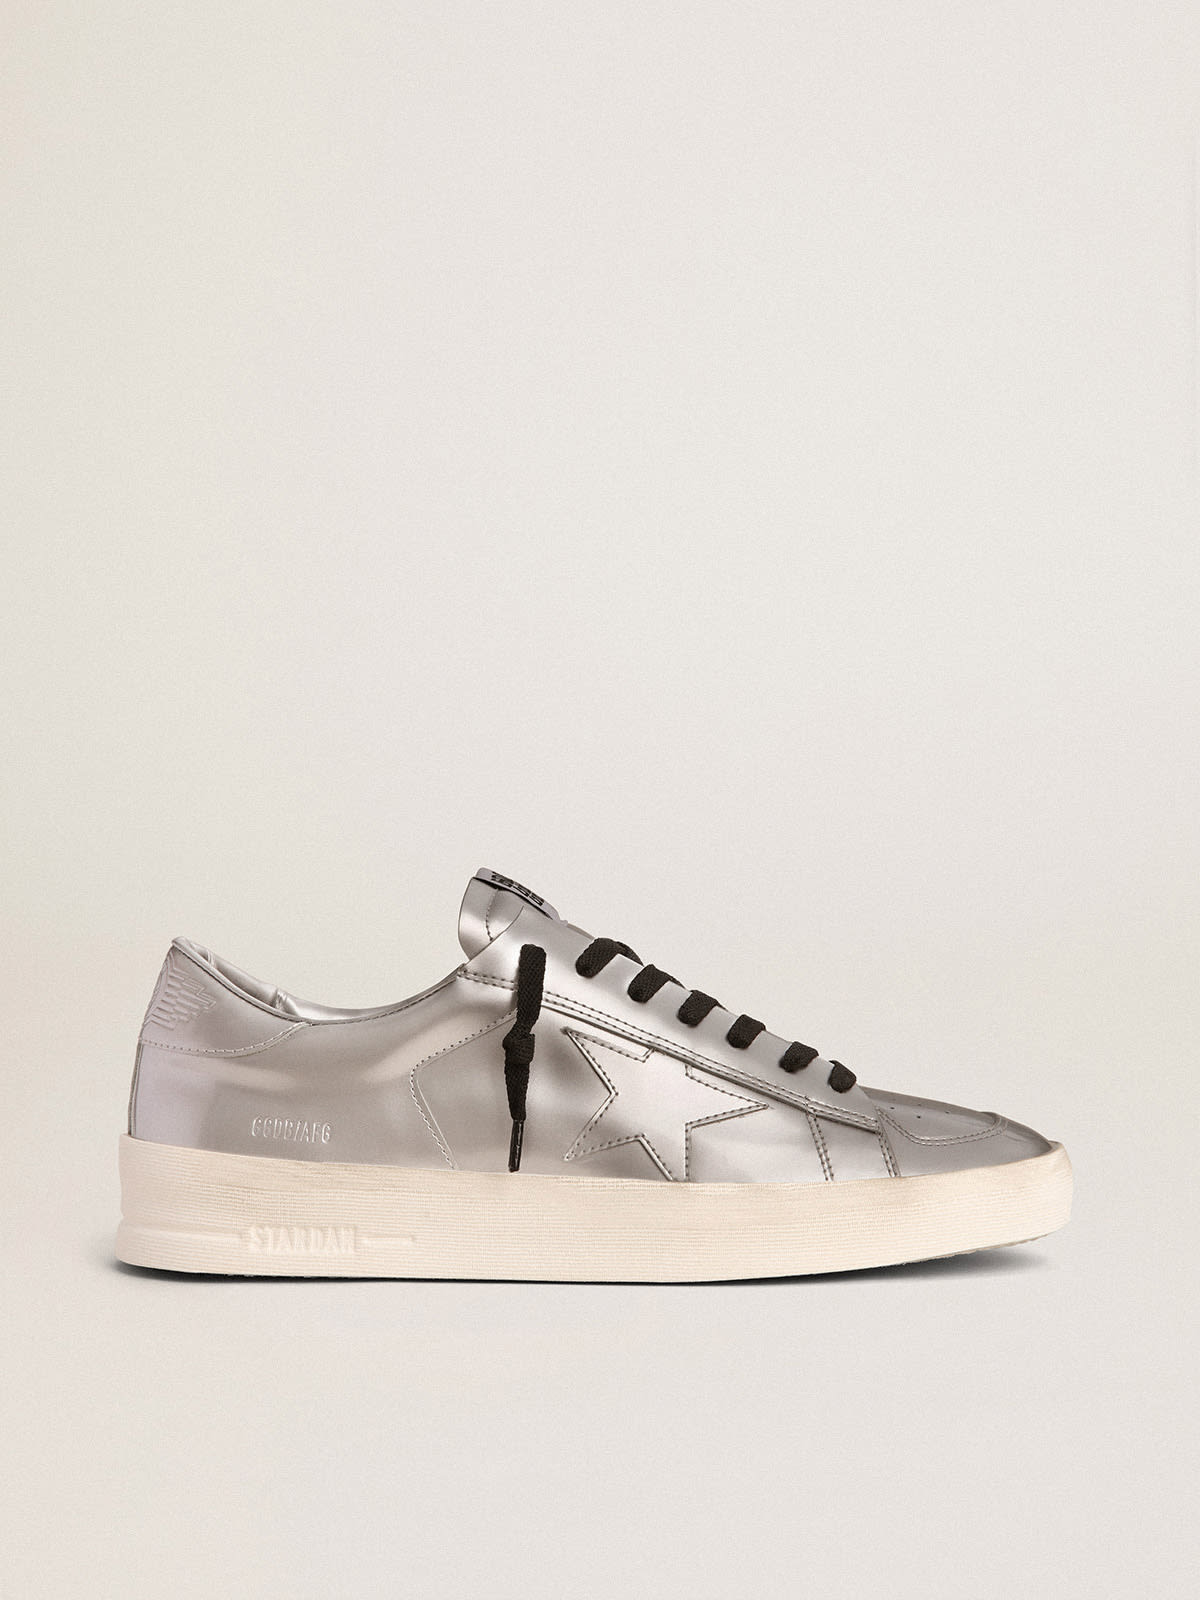 Golden Goose - Stardan sneakers in silver laminated leather in 